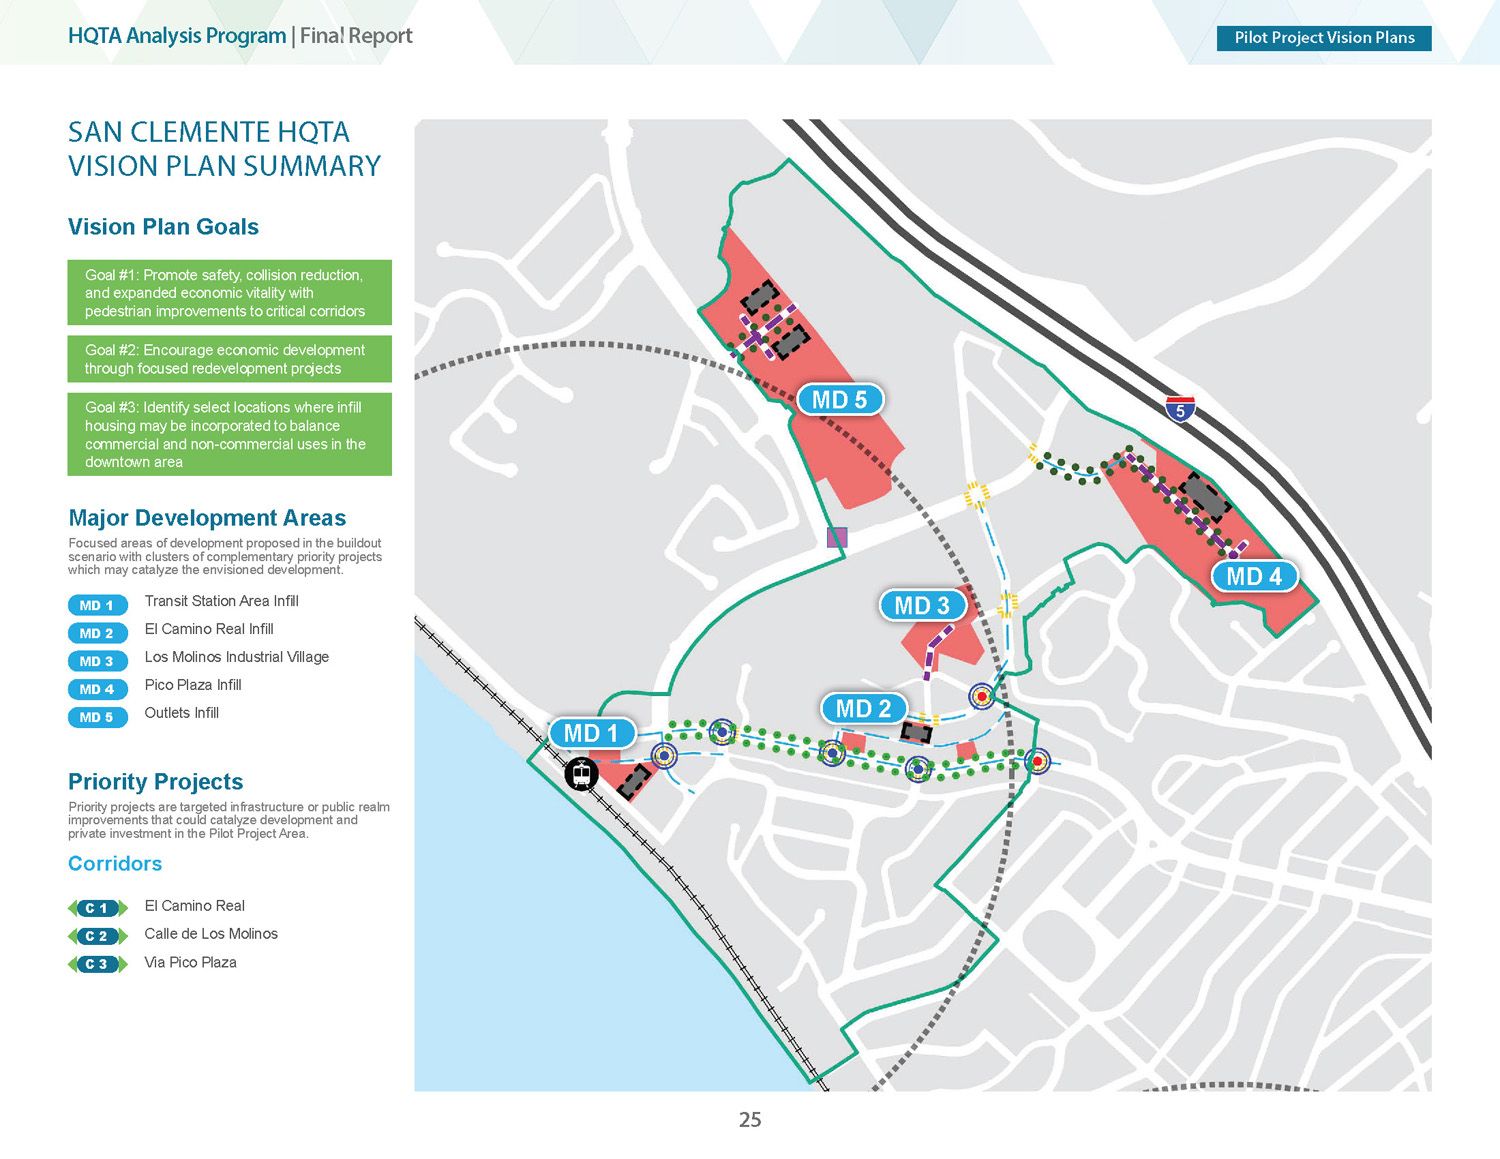 Overview of San Clemente Vision Plan